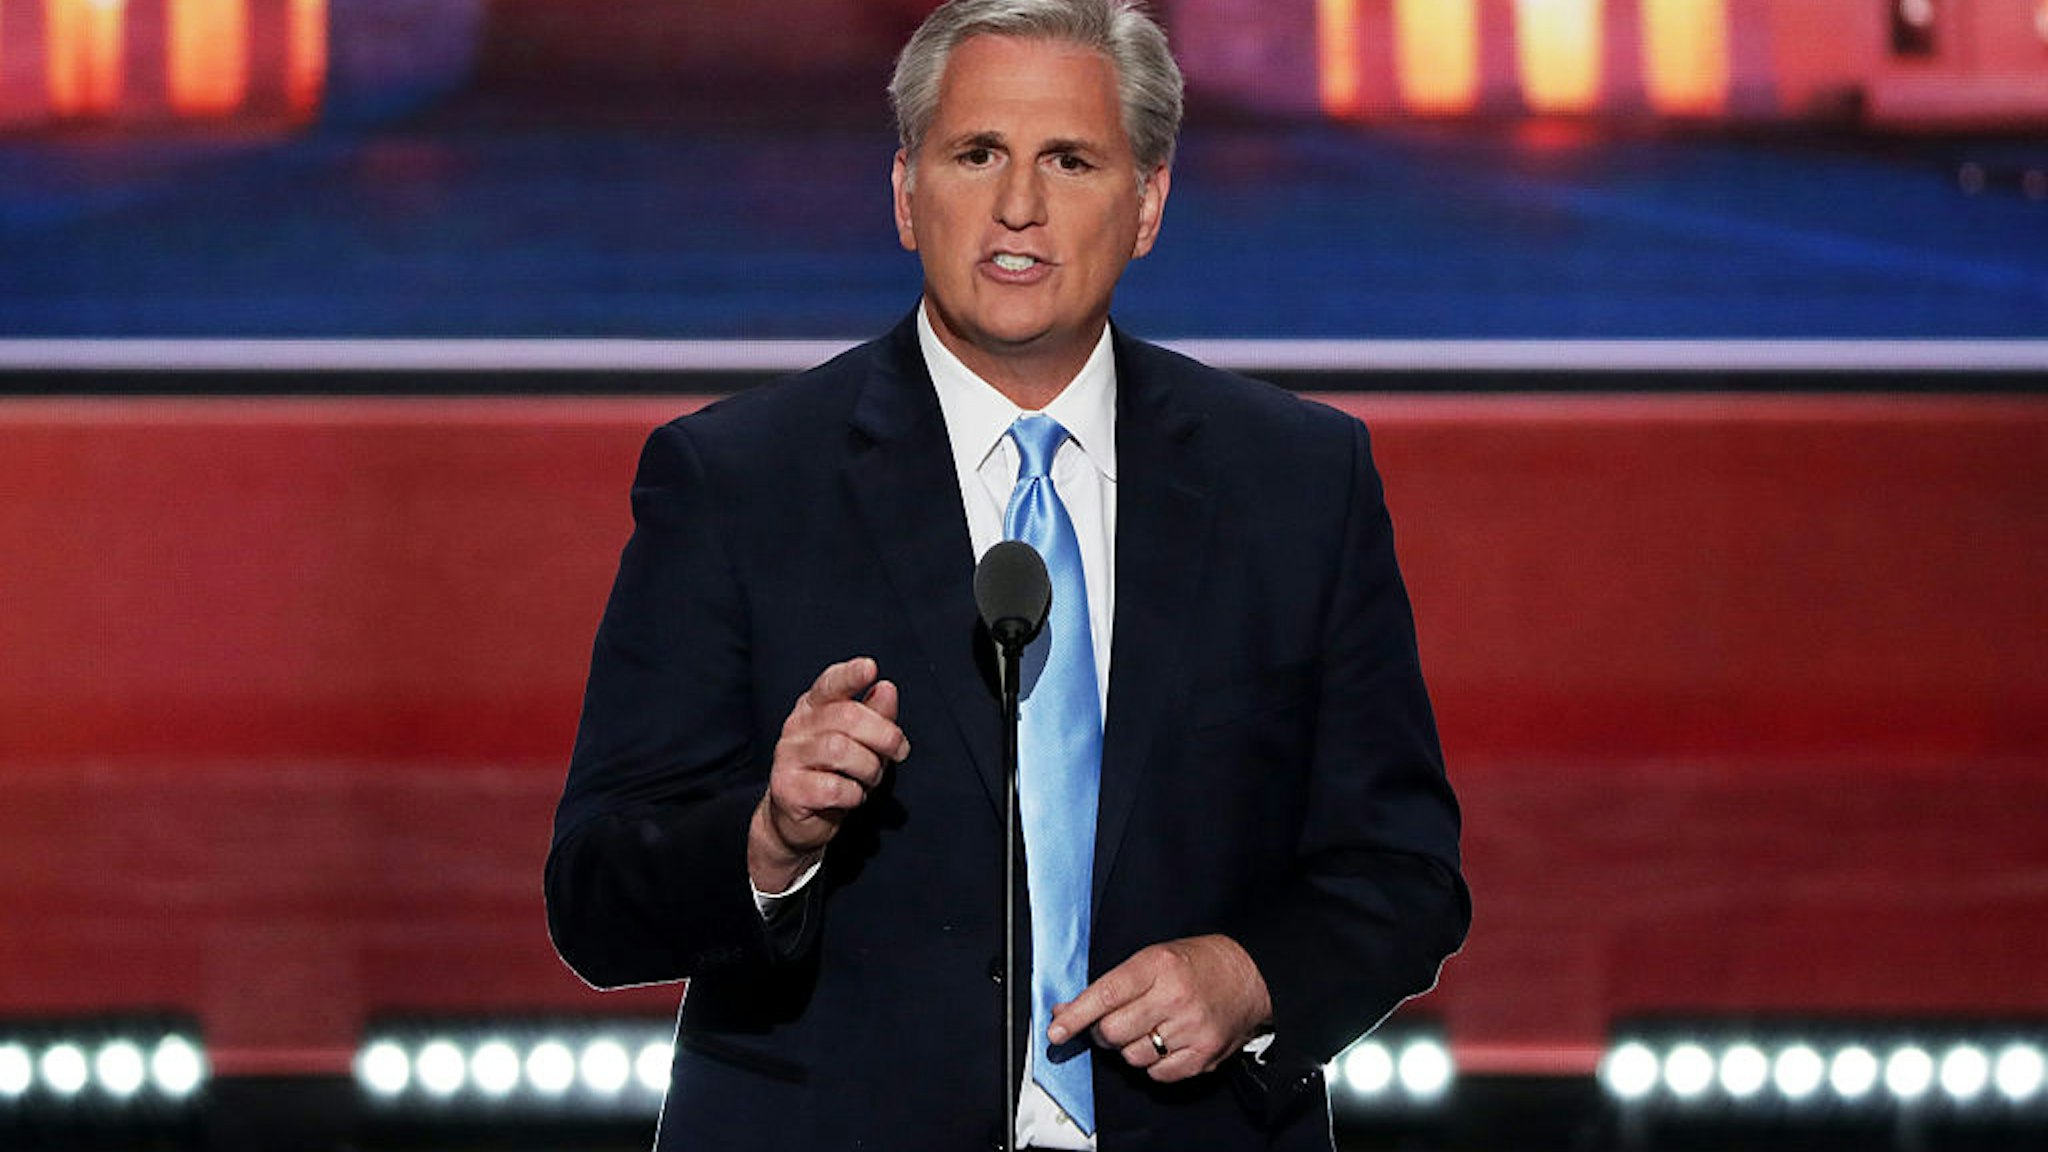 Kevin McCarthy (R-CA) delivers a speech on the second day of the Republican National Convention